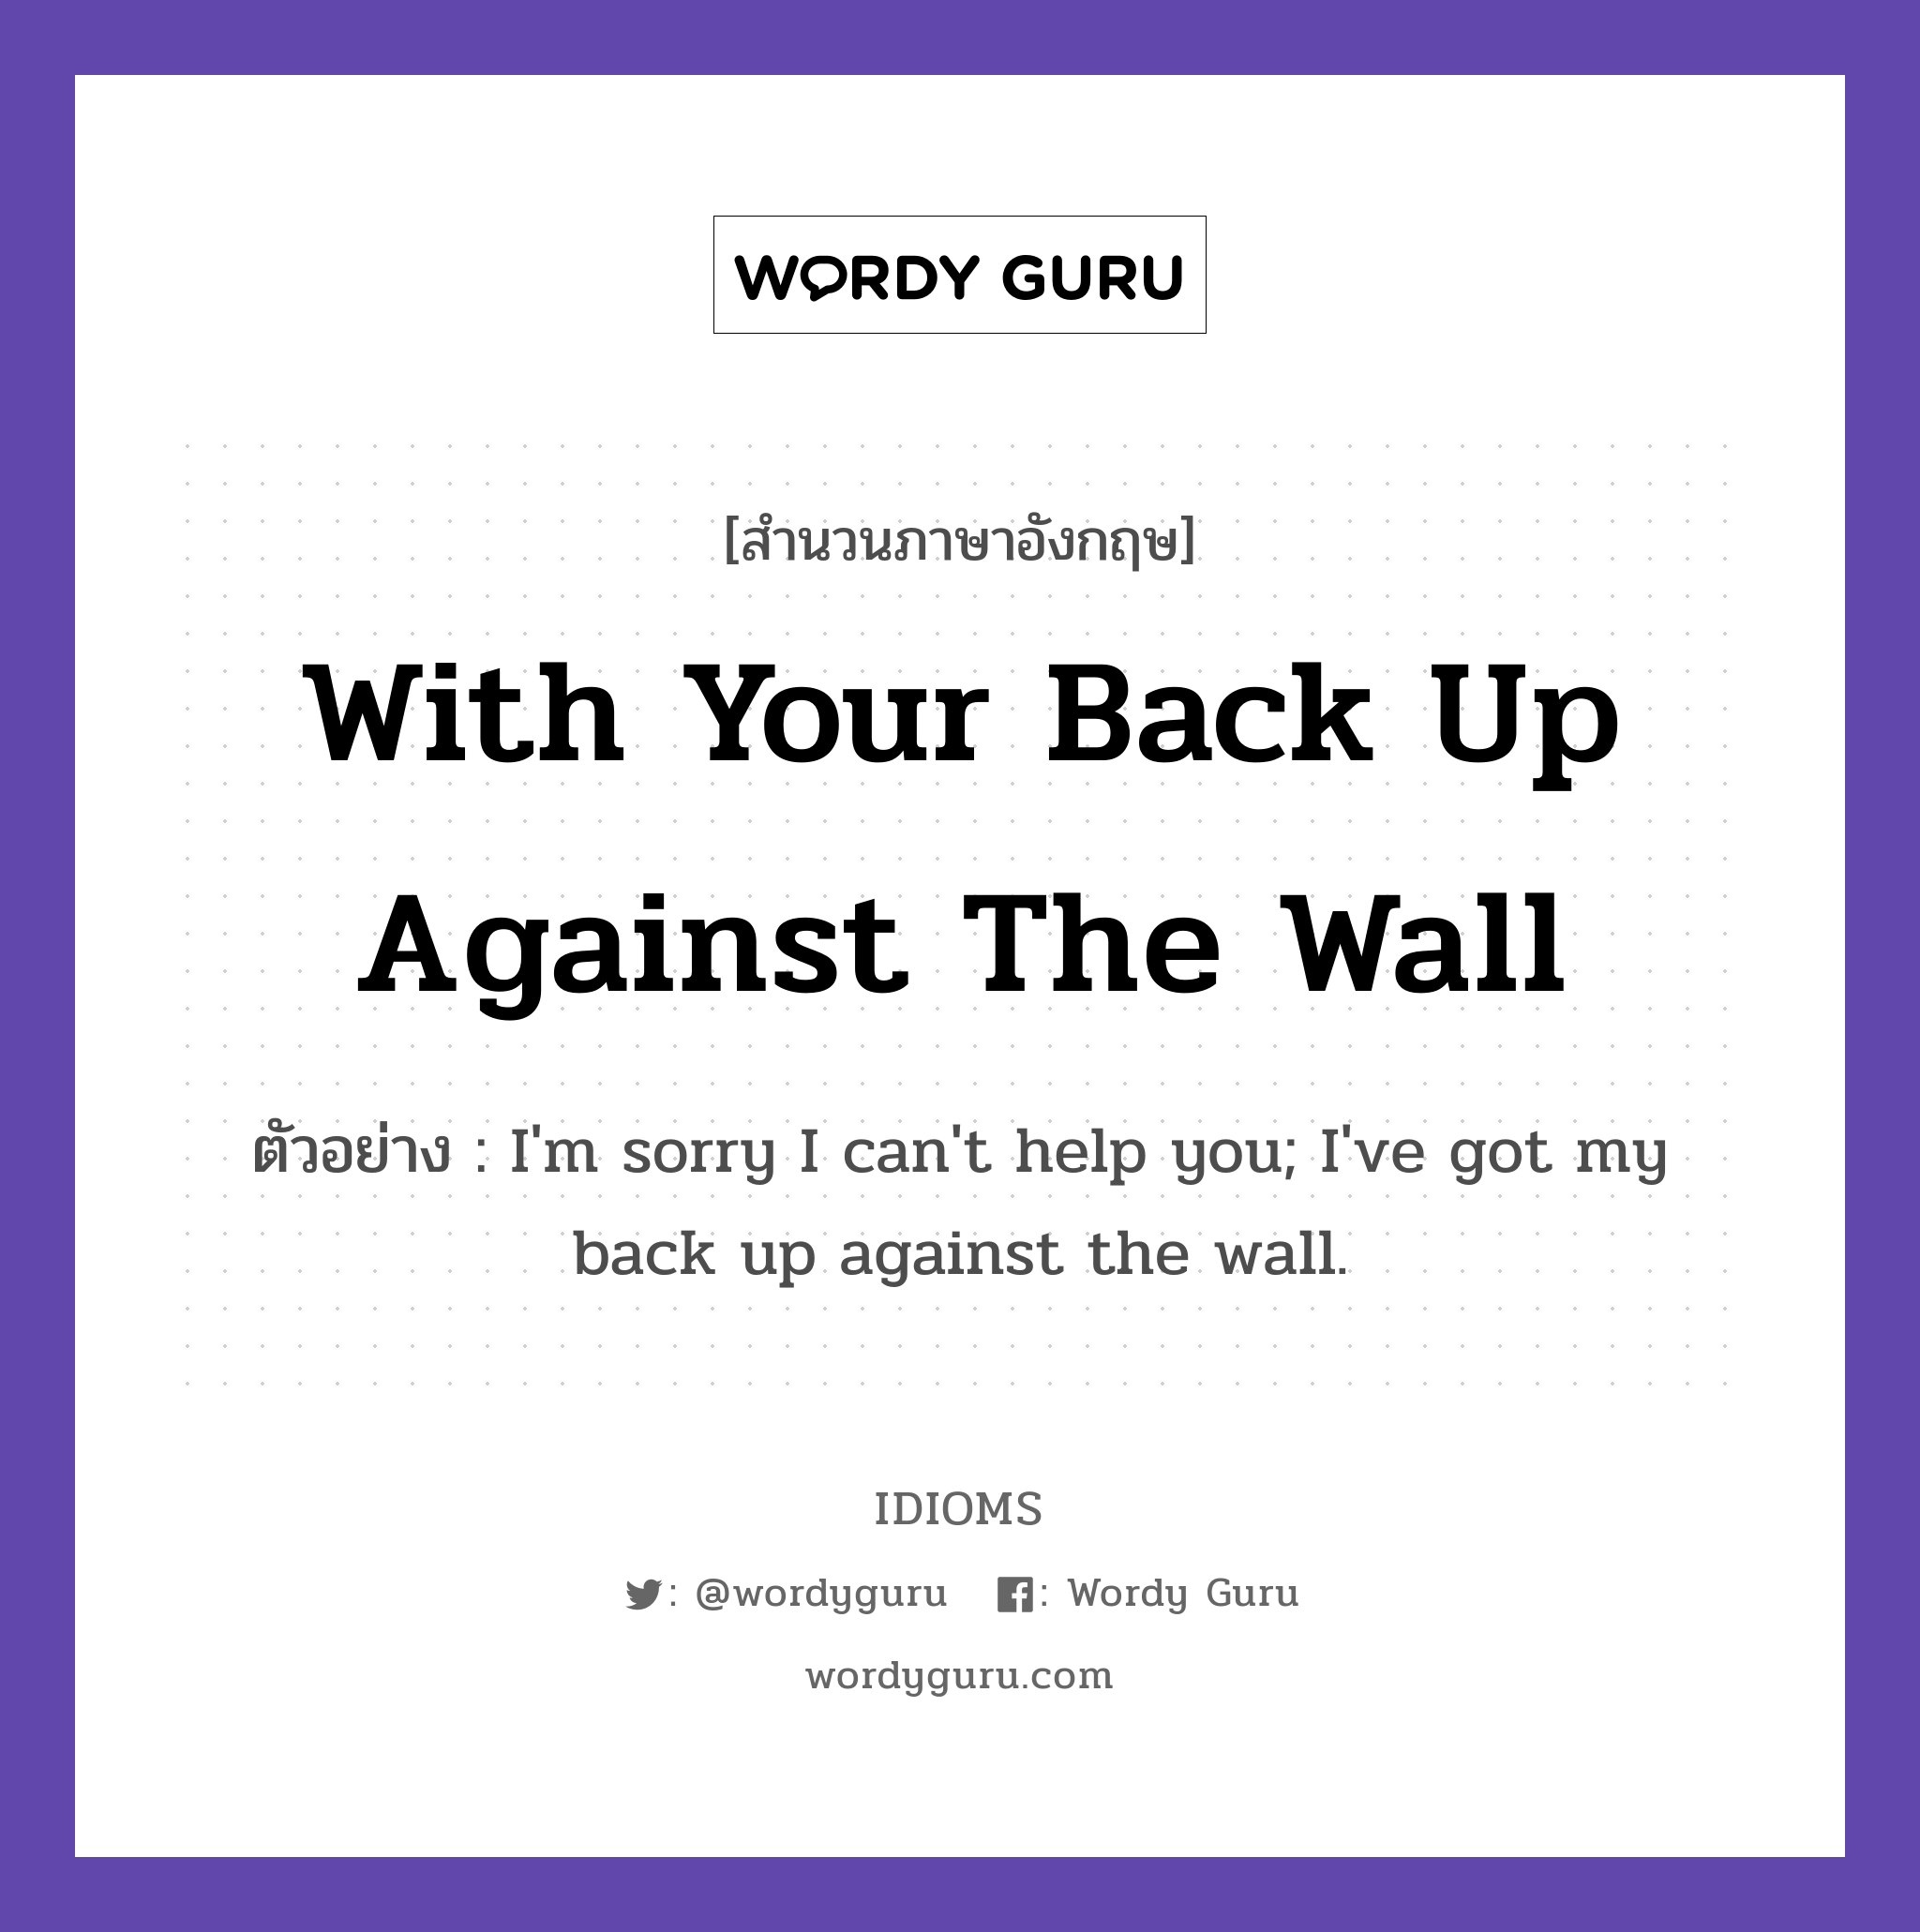 With Your Back Up Against The Wall แปลว่า?, สำนวนภาษาอังกฤษ With Your Back Up Against The Wall ตัวอย่าง I'm sorry I can't help you; I've got my back up against the wall.